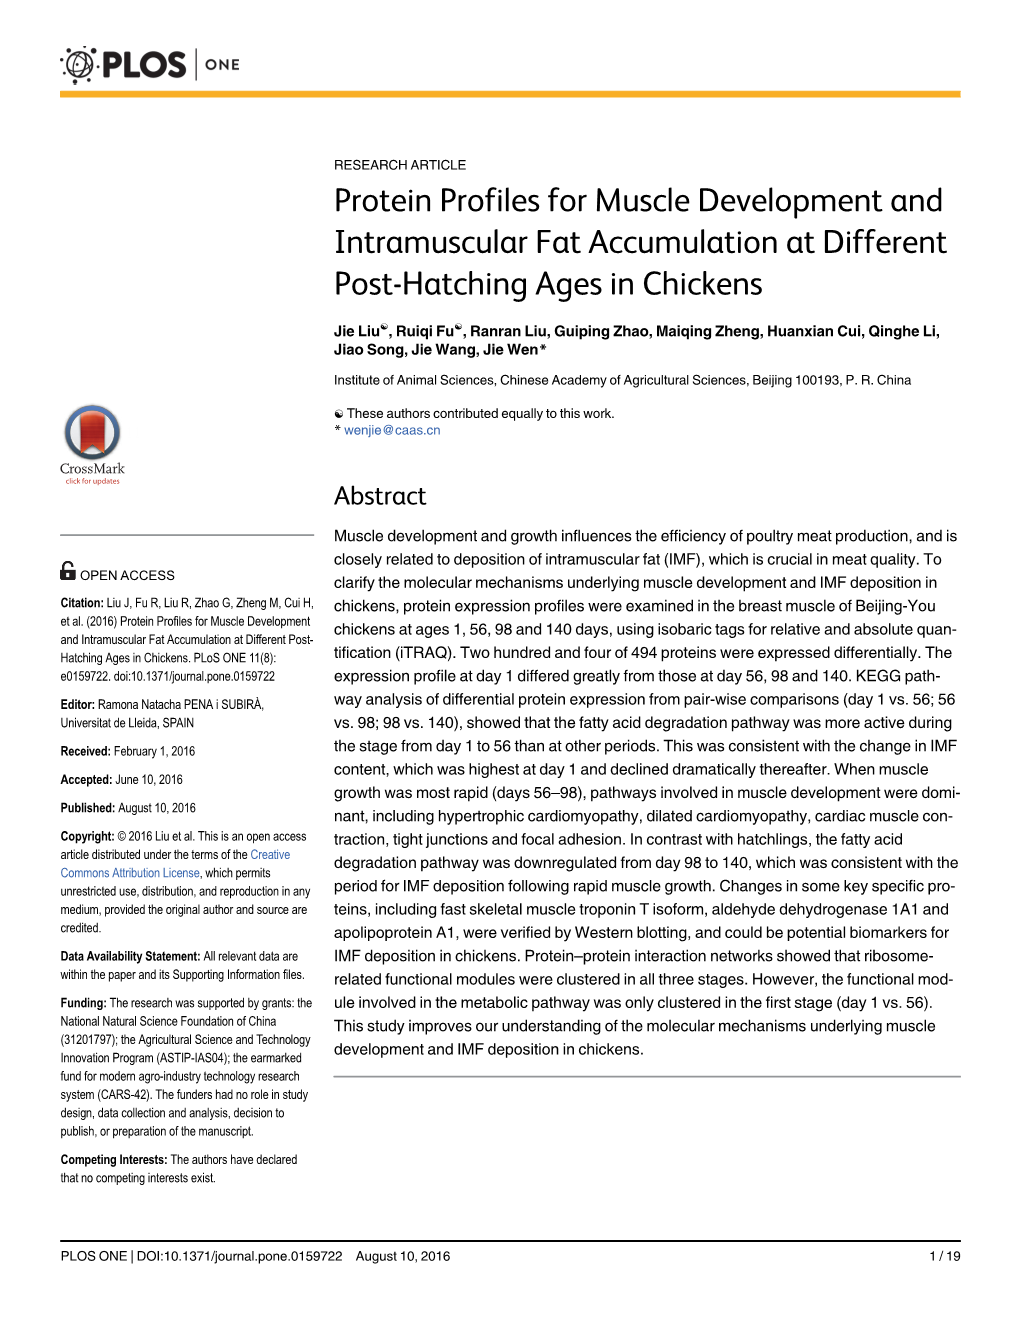 Protein Profiles for Muscle Development and Intramuscular Fat Accumulation at Different Post-Hatching Ages in Chickens